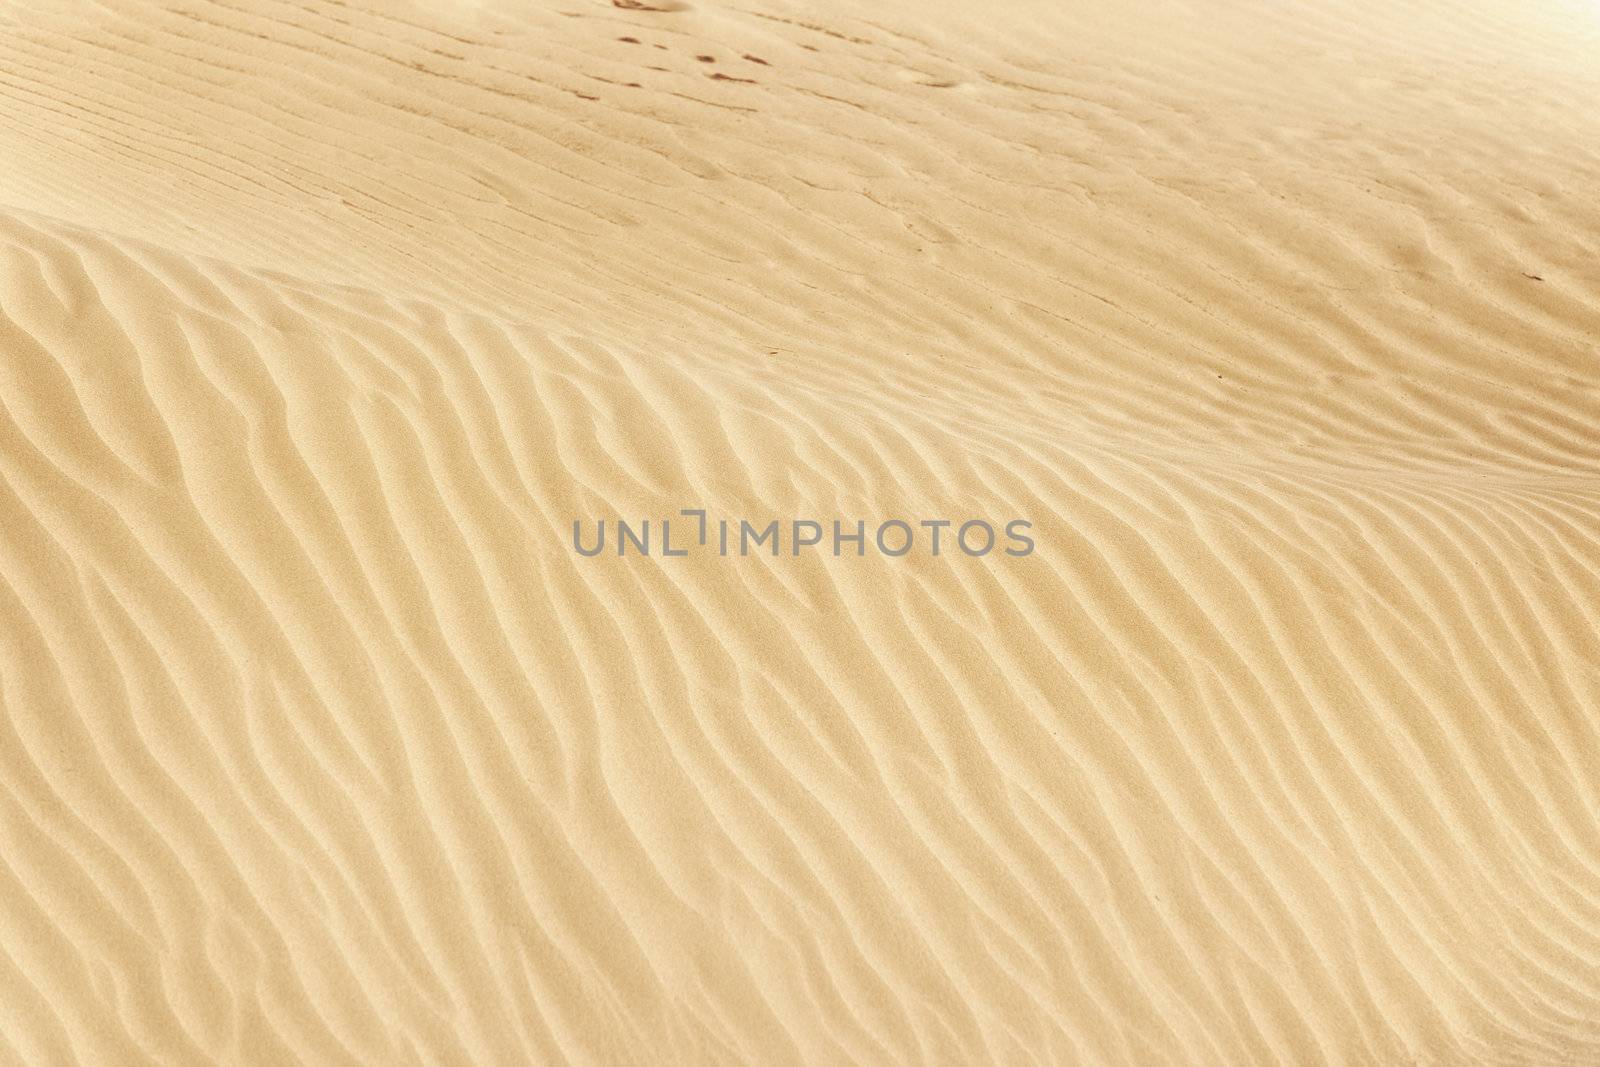 View on the rippled sand dunes in the desert. Natural light and colors